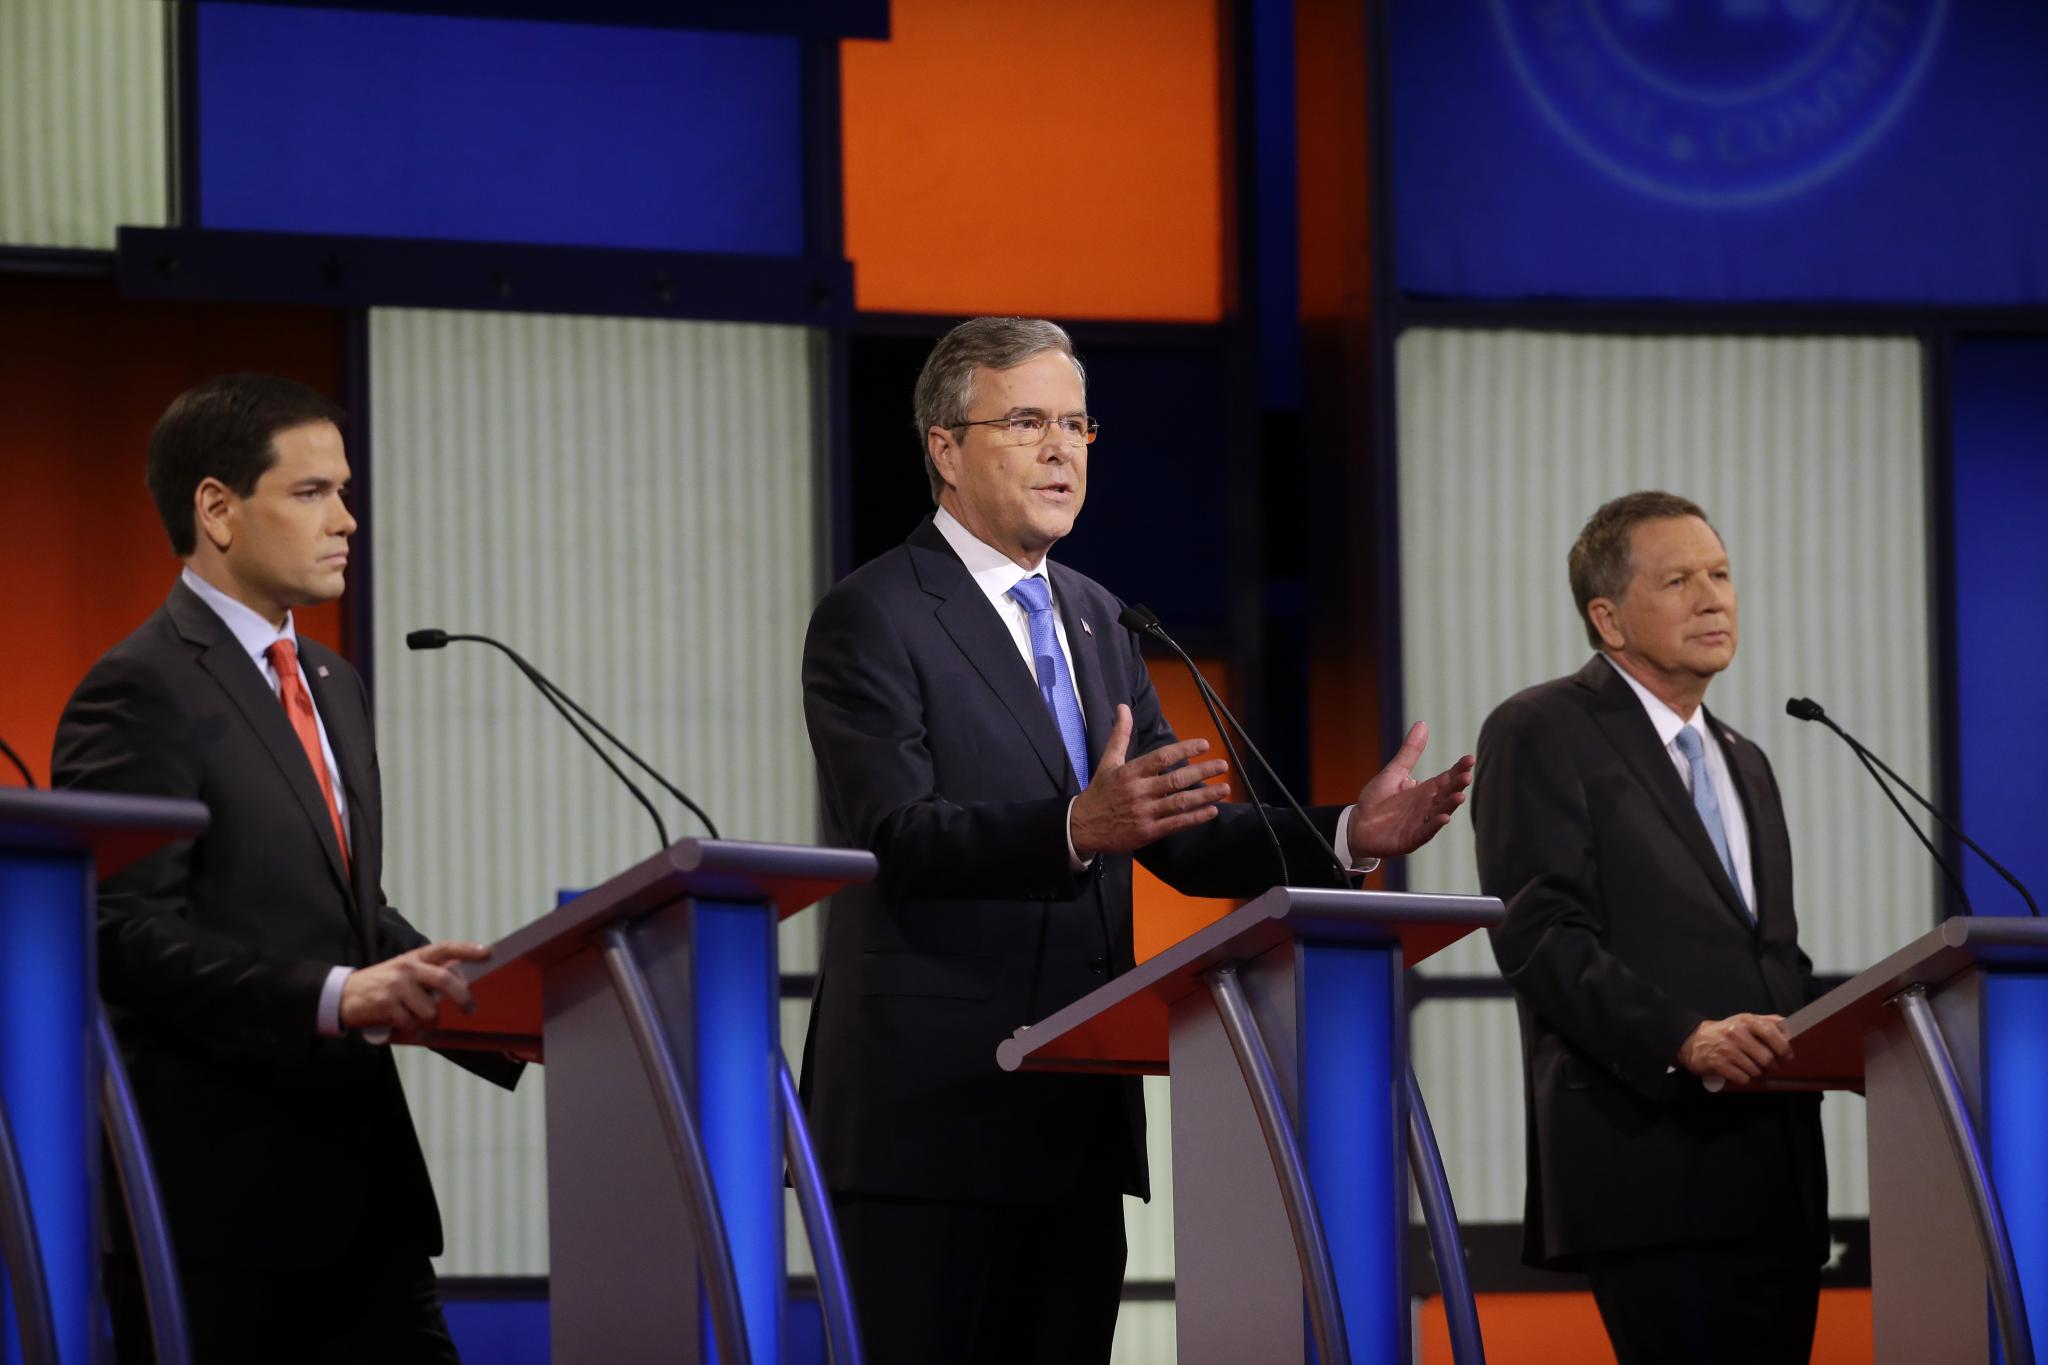 GOP Candidates Bask in Donald Trump's Absence in Final Debate Before Iowa Caucuses